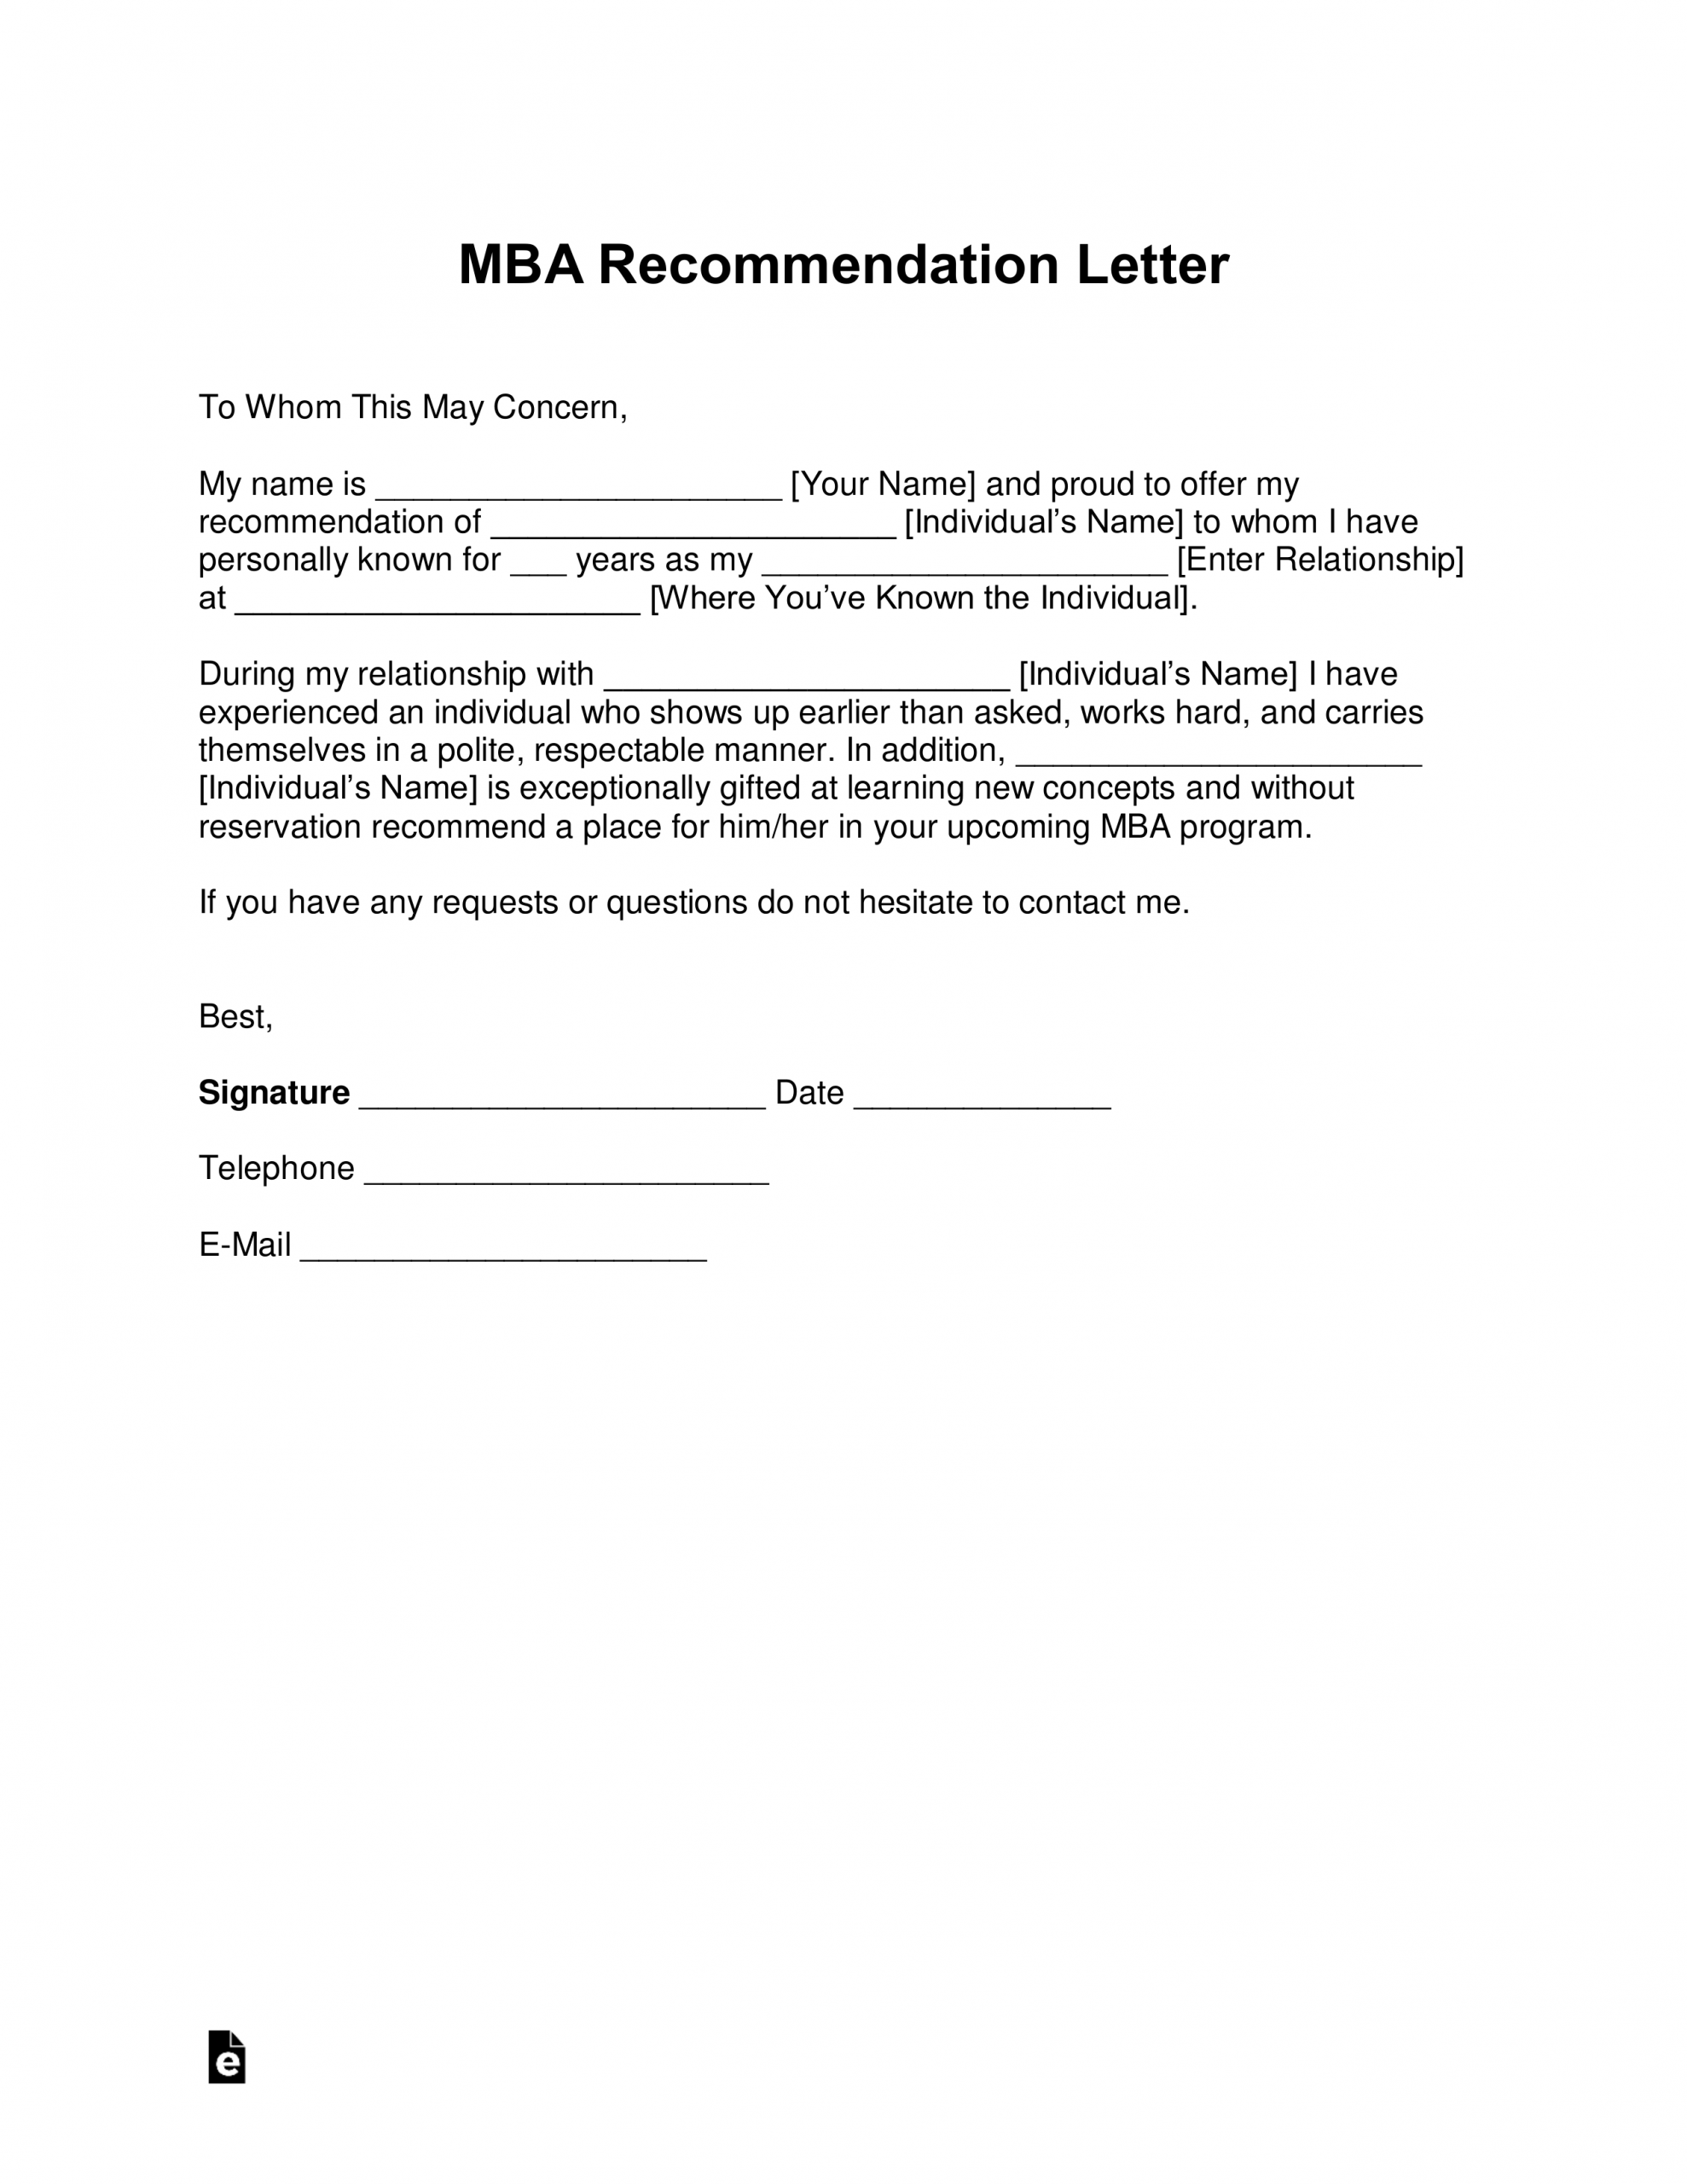 Free Mba Letter Of Recommendation Template With Samples inside dimensions 2550 X 3301